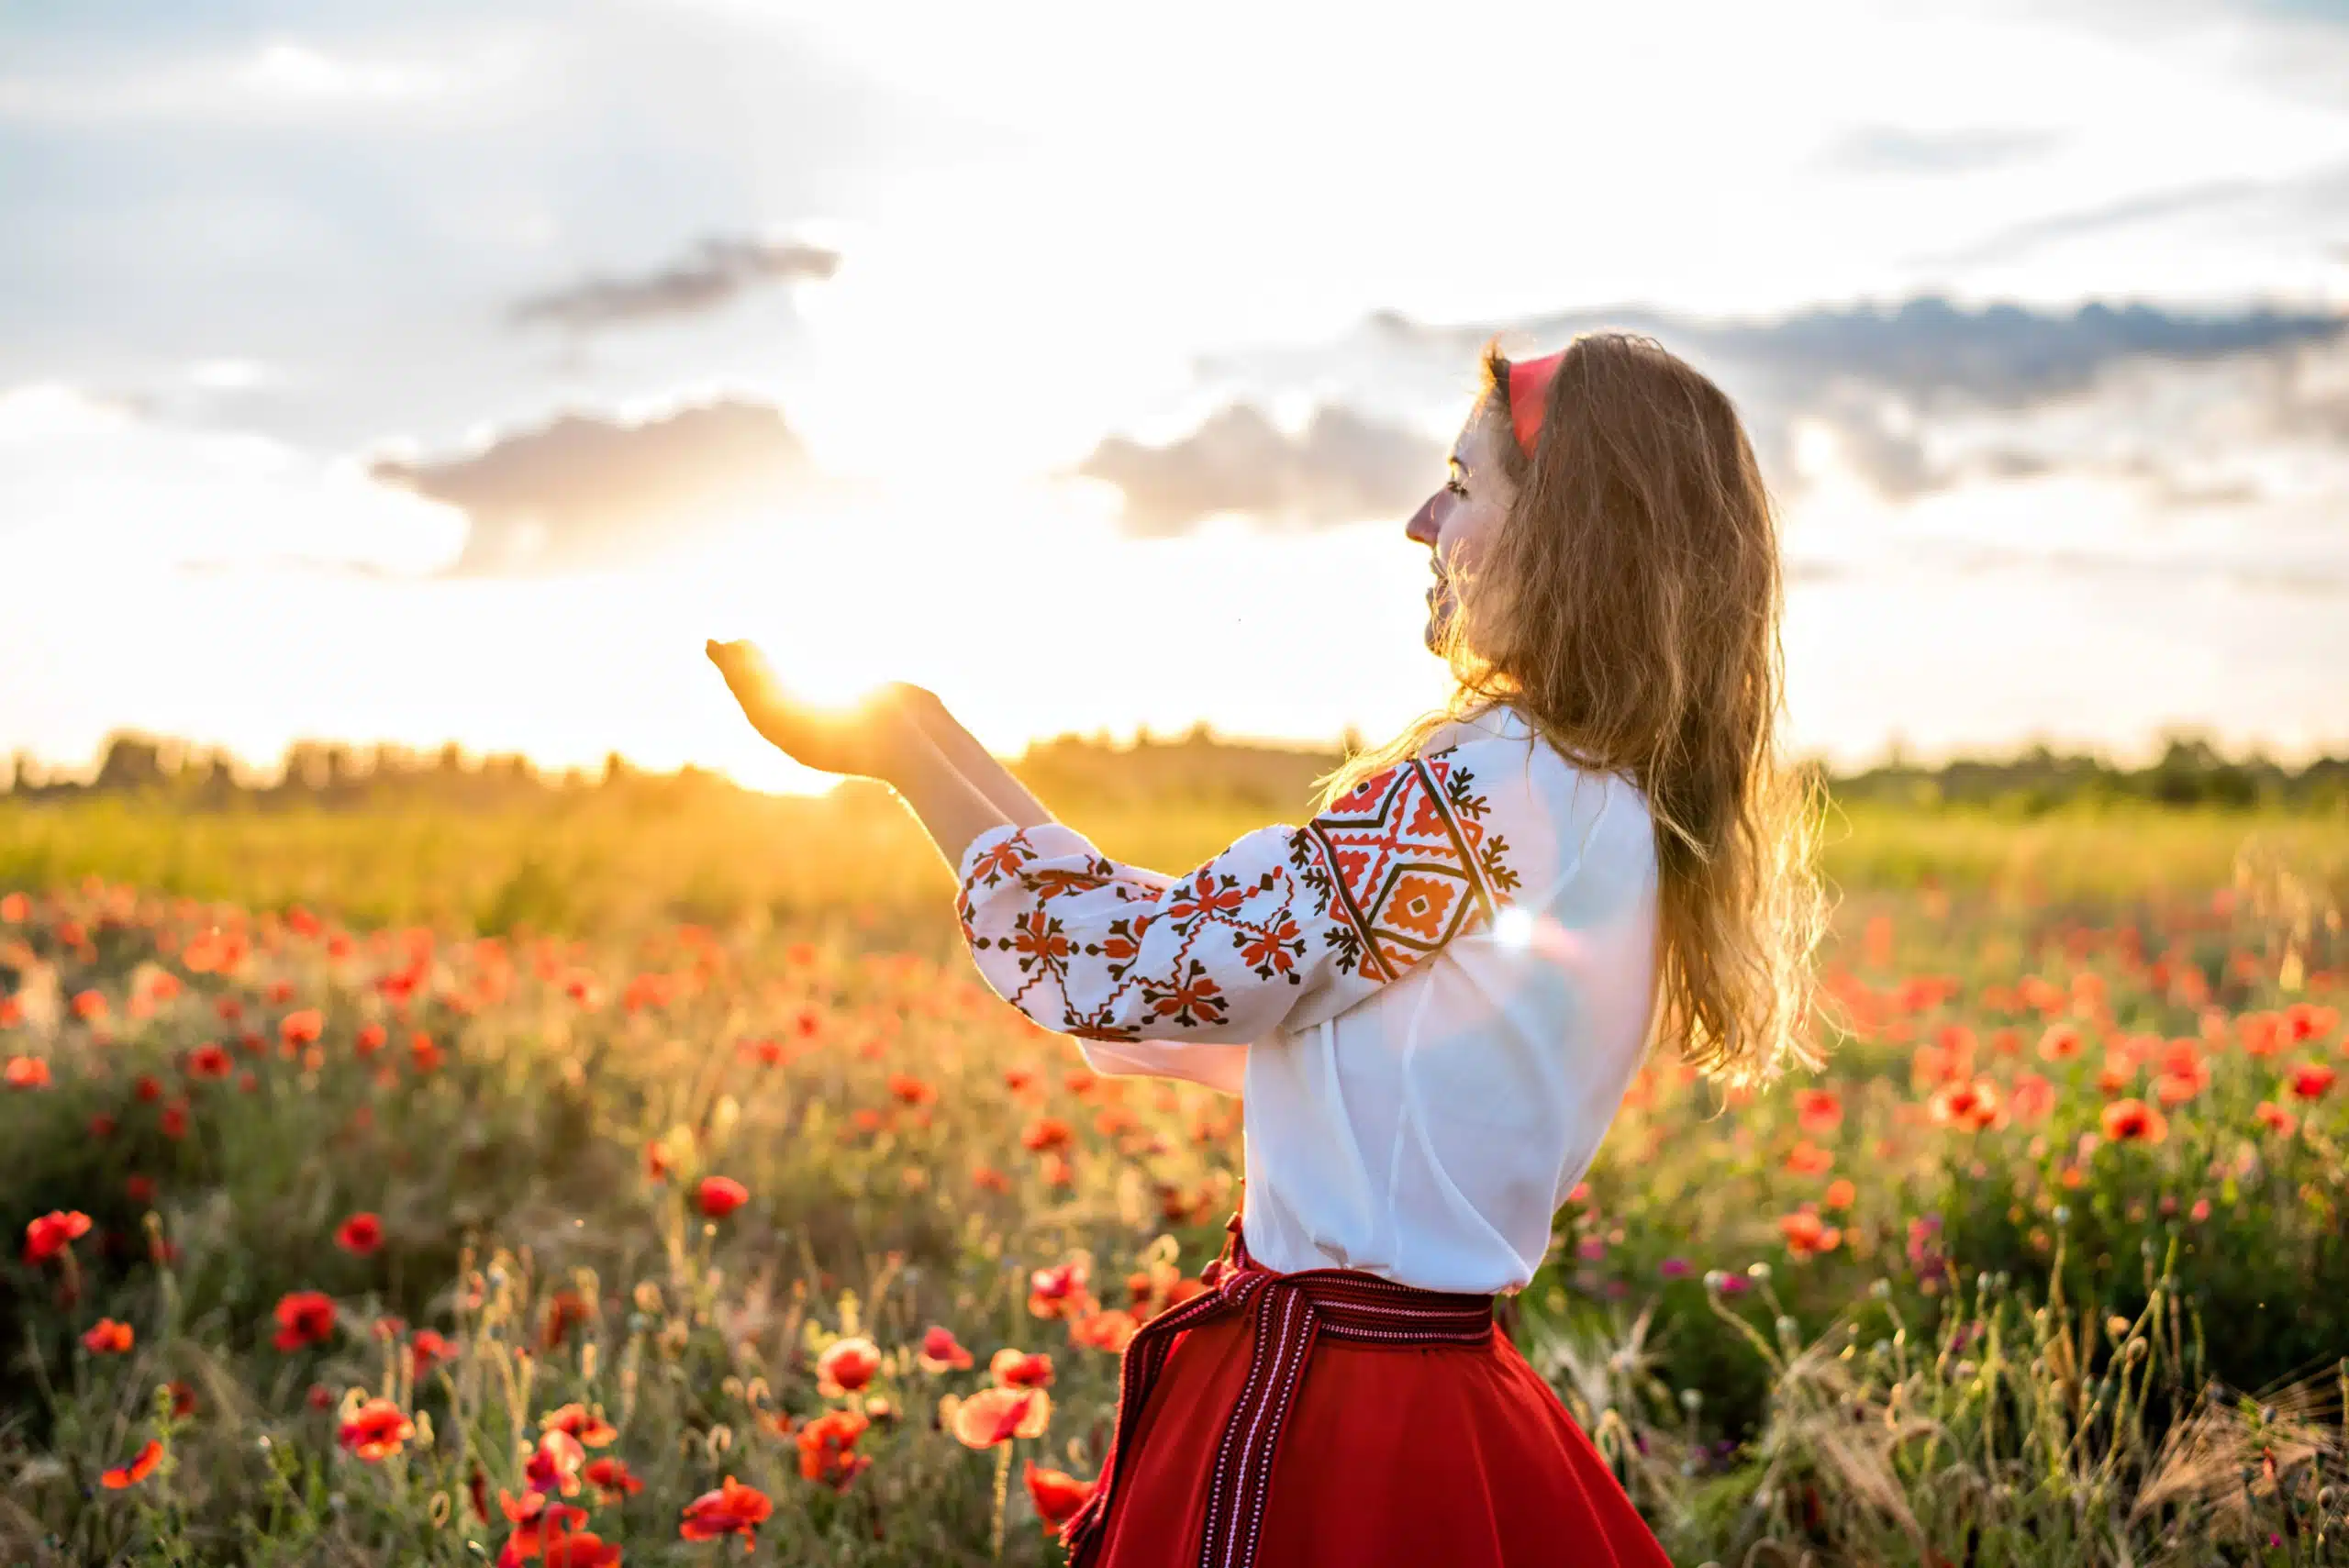 Woman in embroidery shirt holds the sun in hands in field of red poppies.